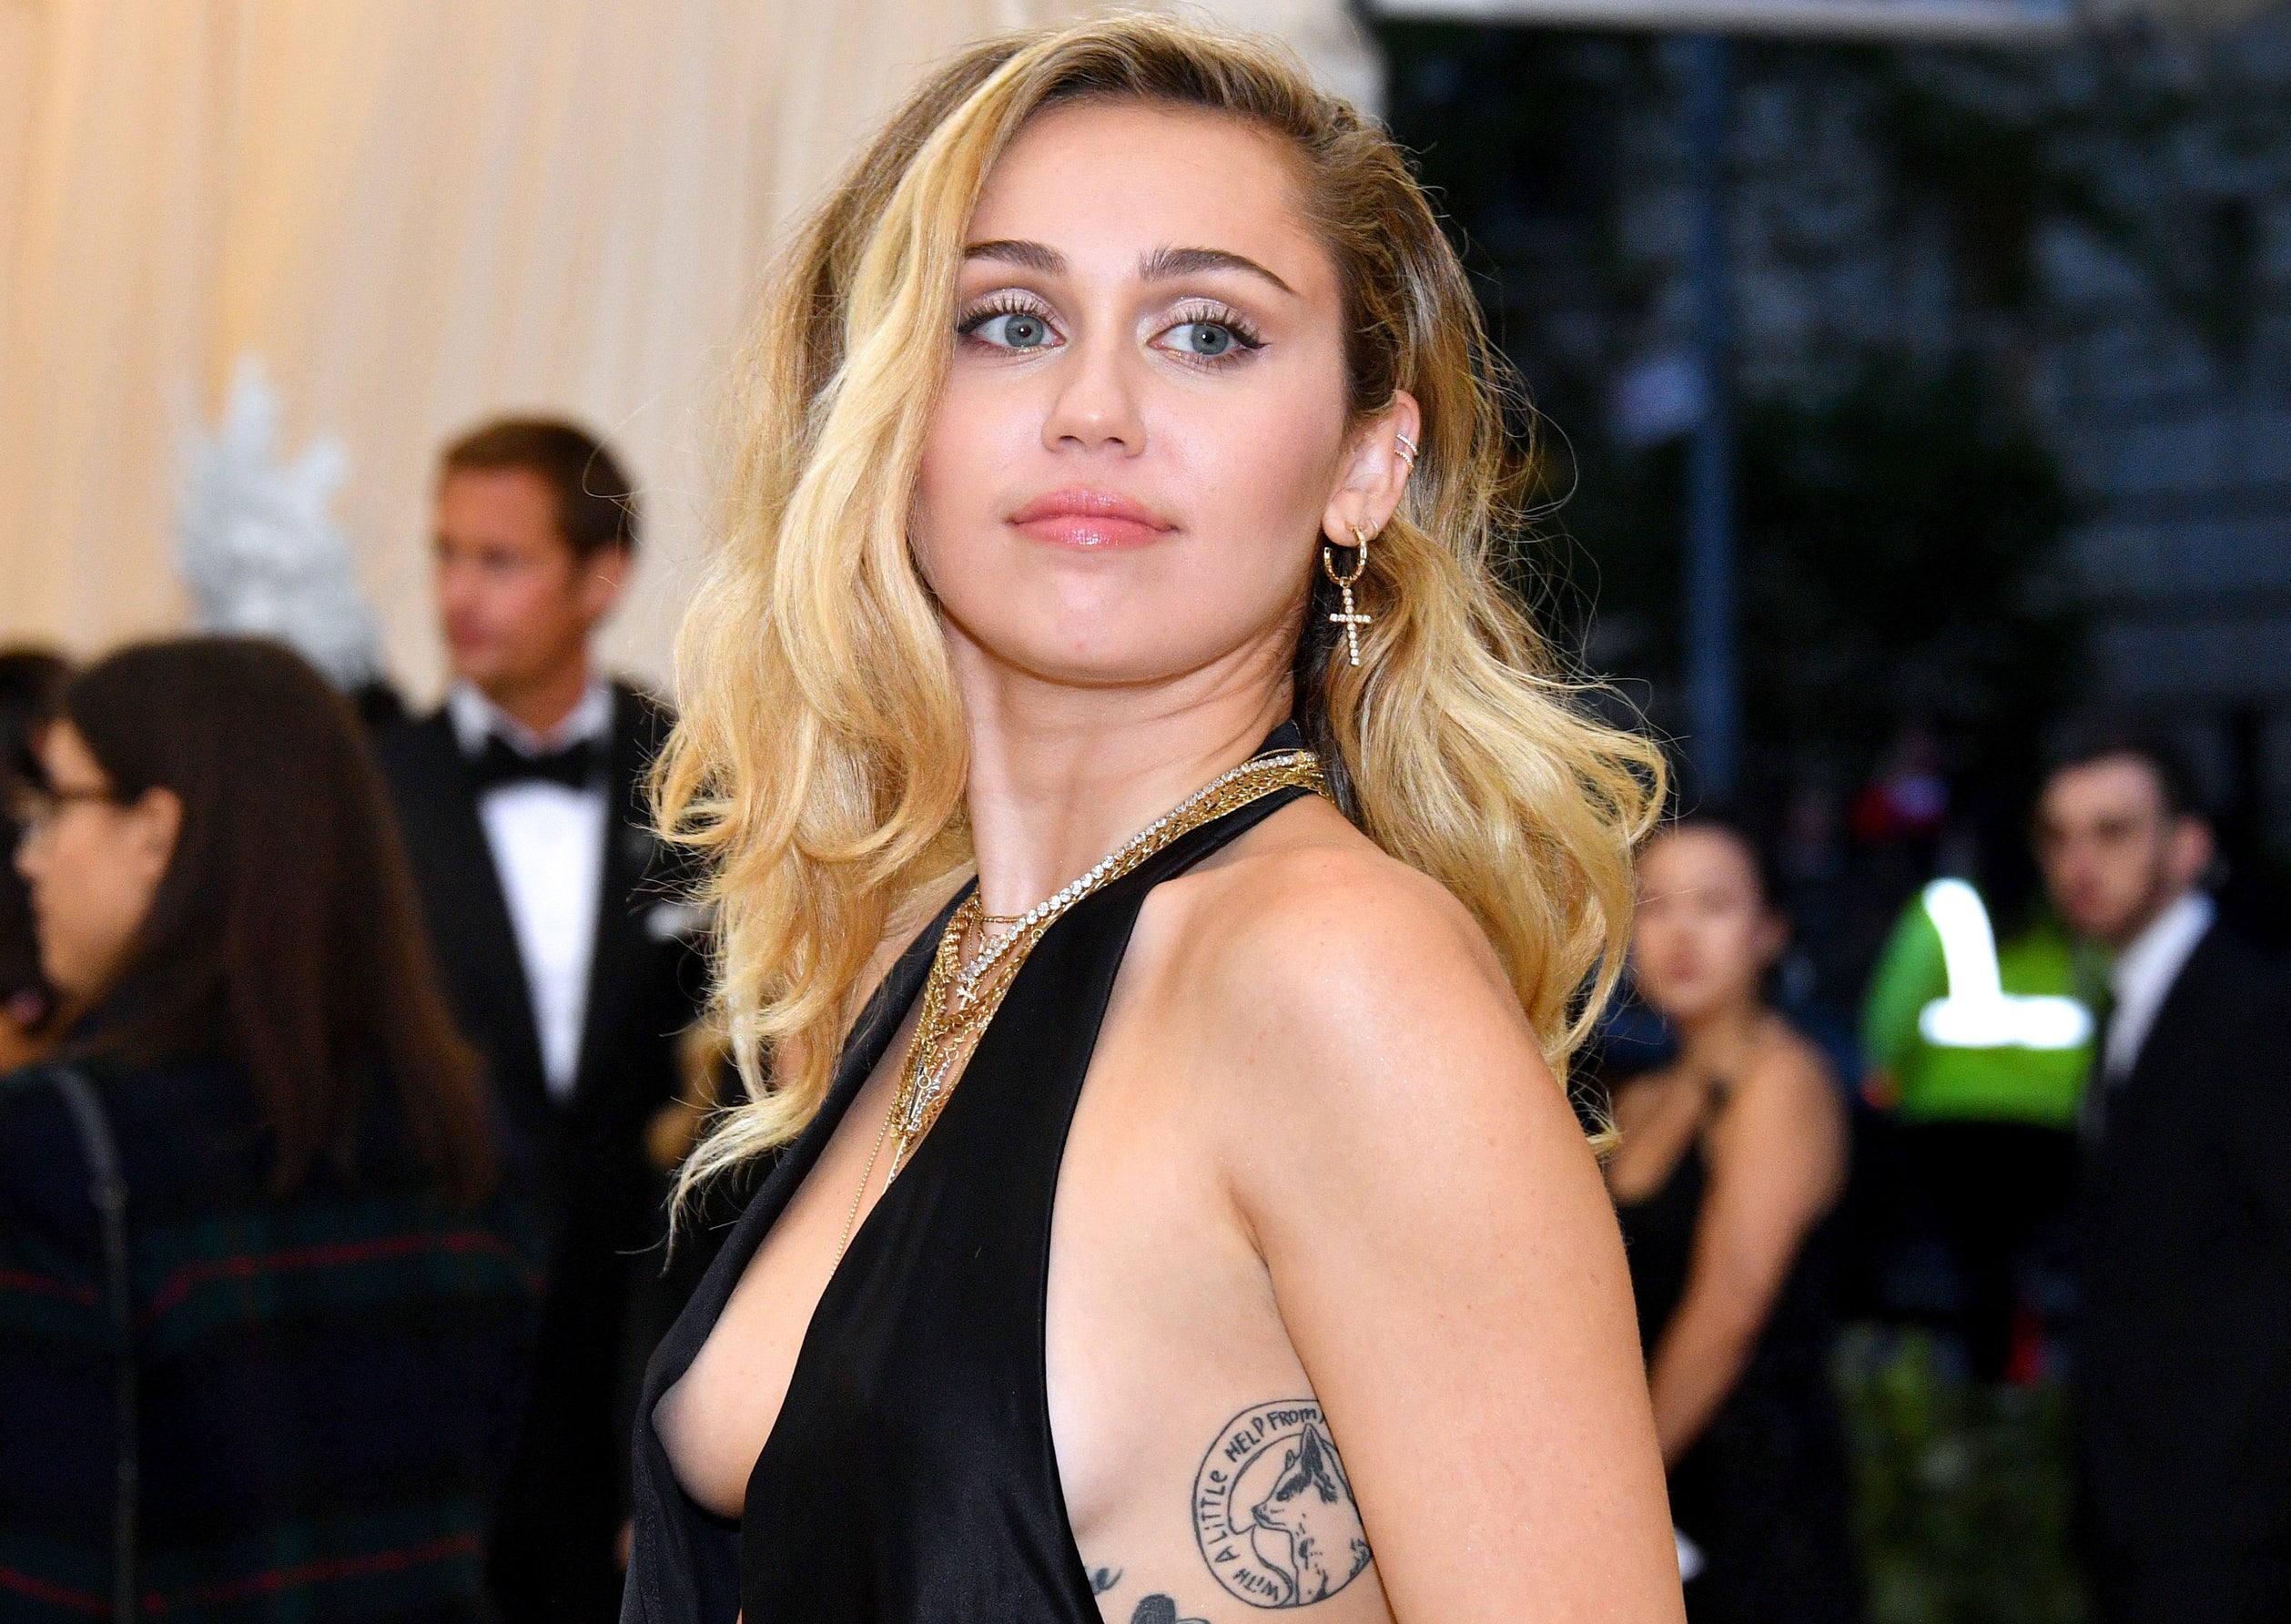 Miley looks over her shoulder while wearing a black dress with a plunging neckline